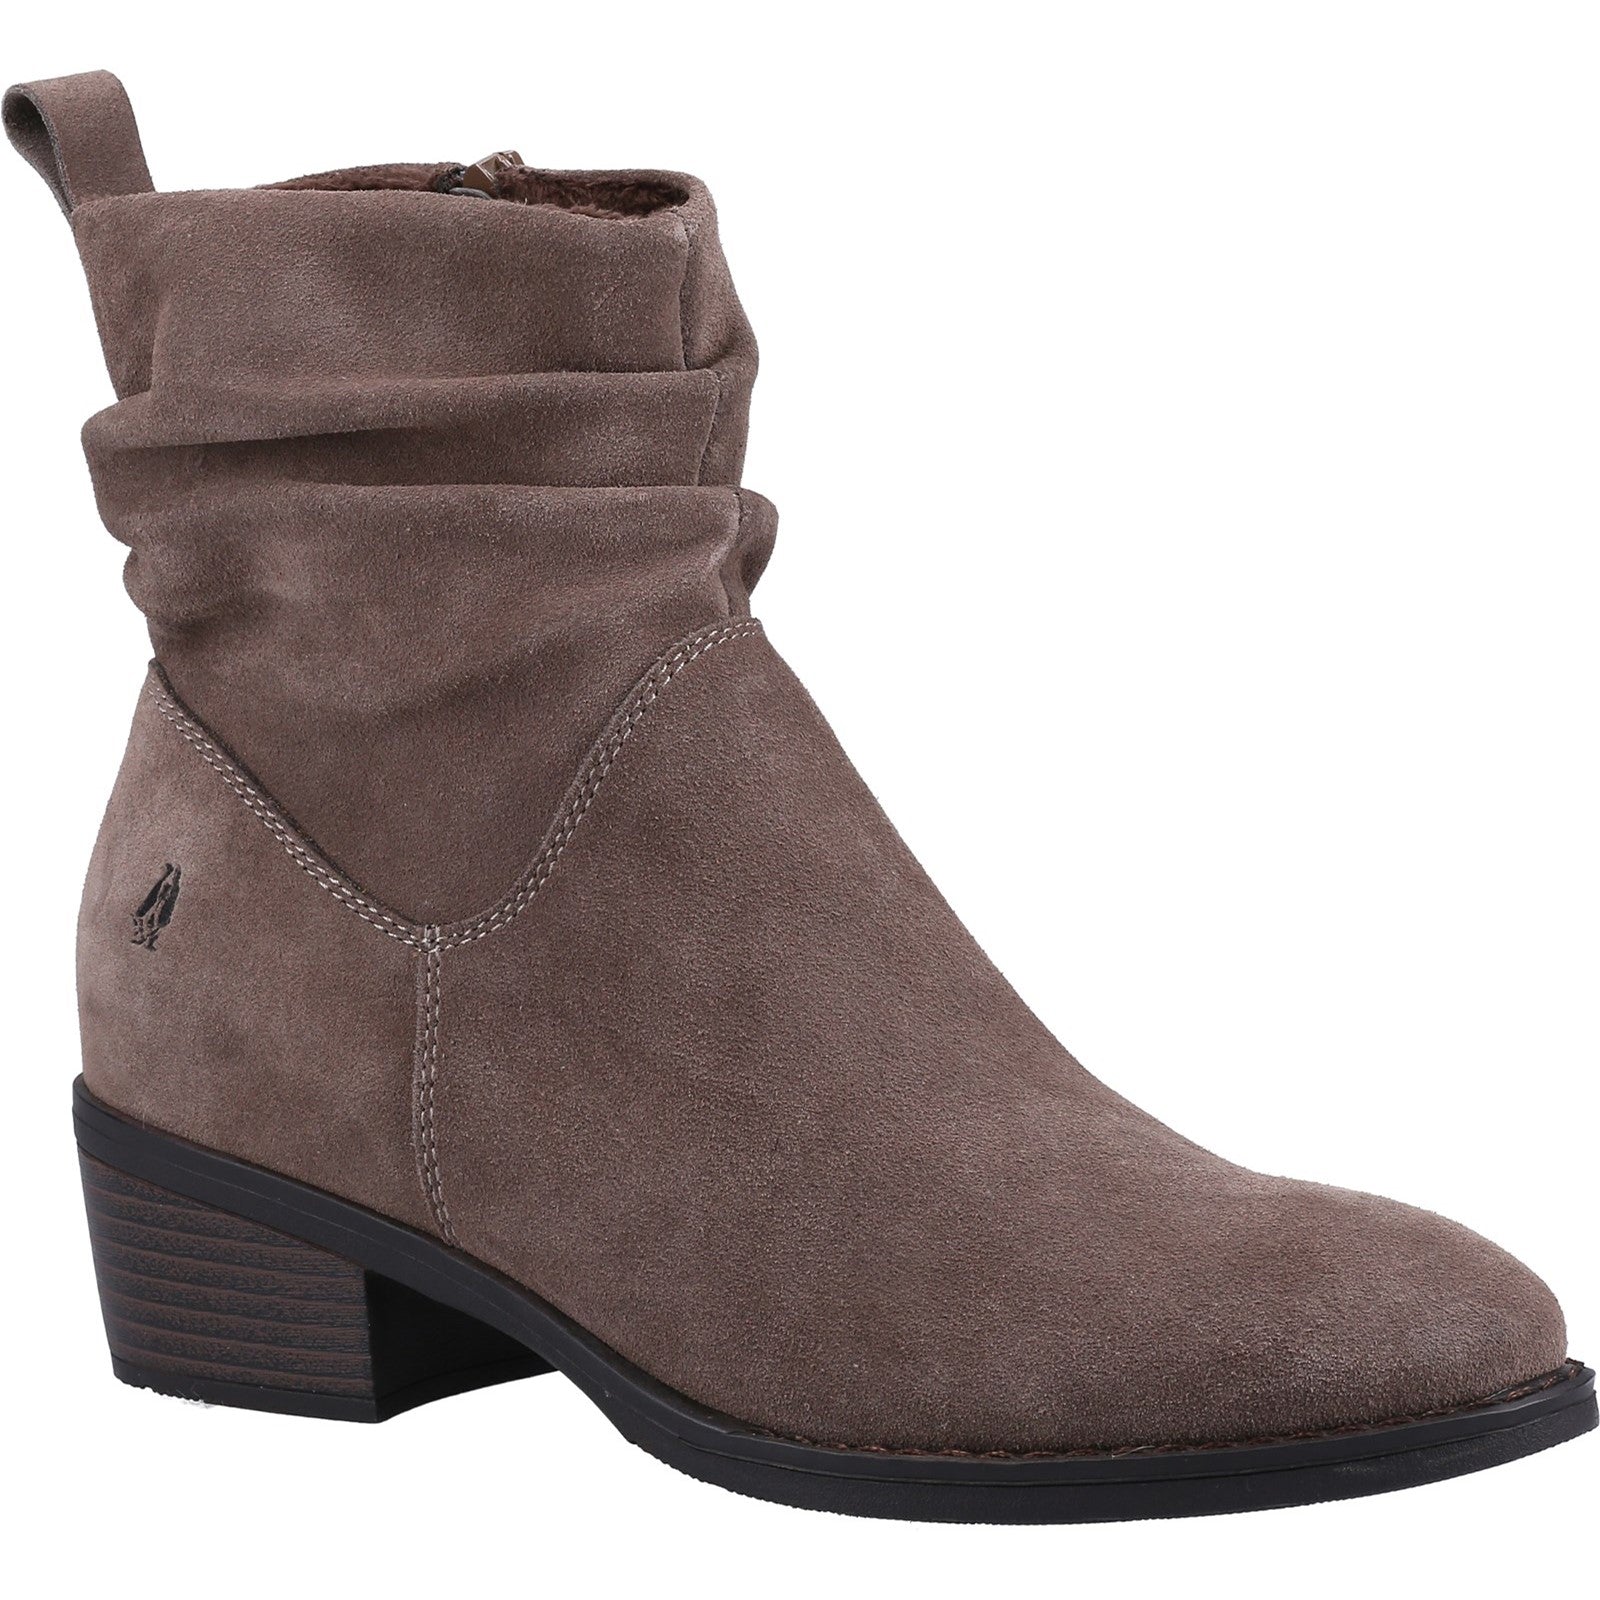 Ladies Ankle Boots Taupe Hush Puppies Iris Boot